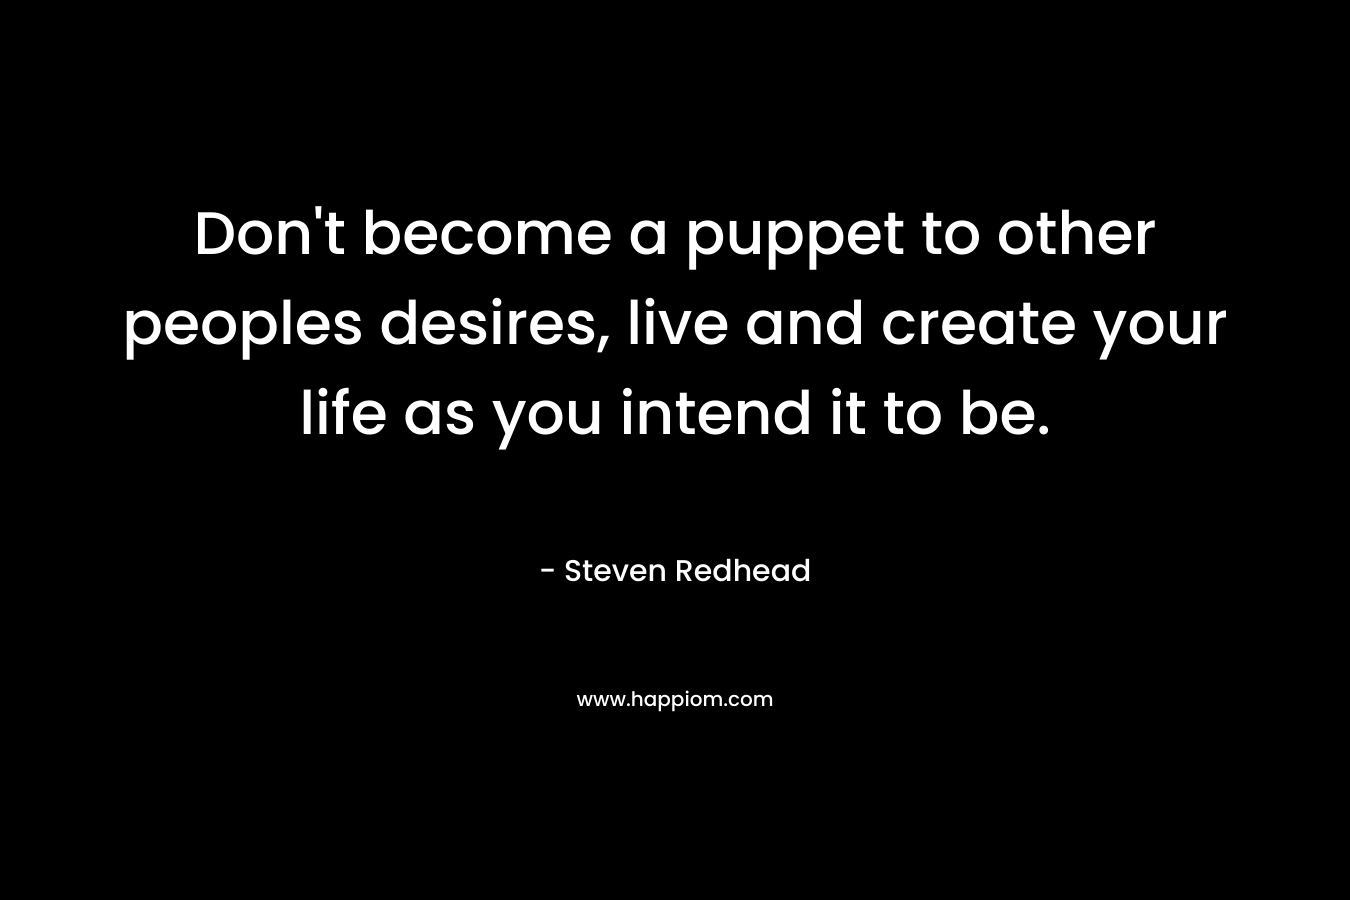 Don't become a puppet to other peoples desires, live and create your life as you intend it to be.